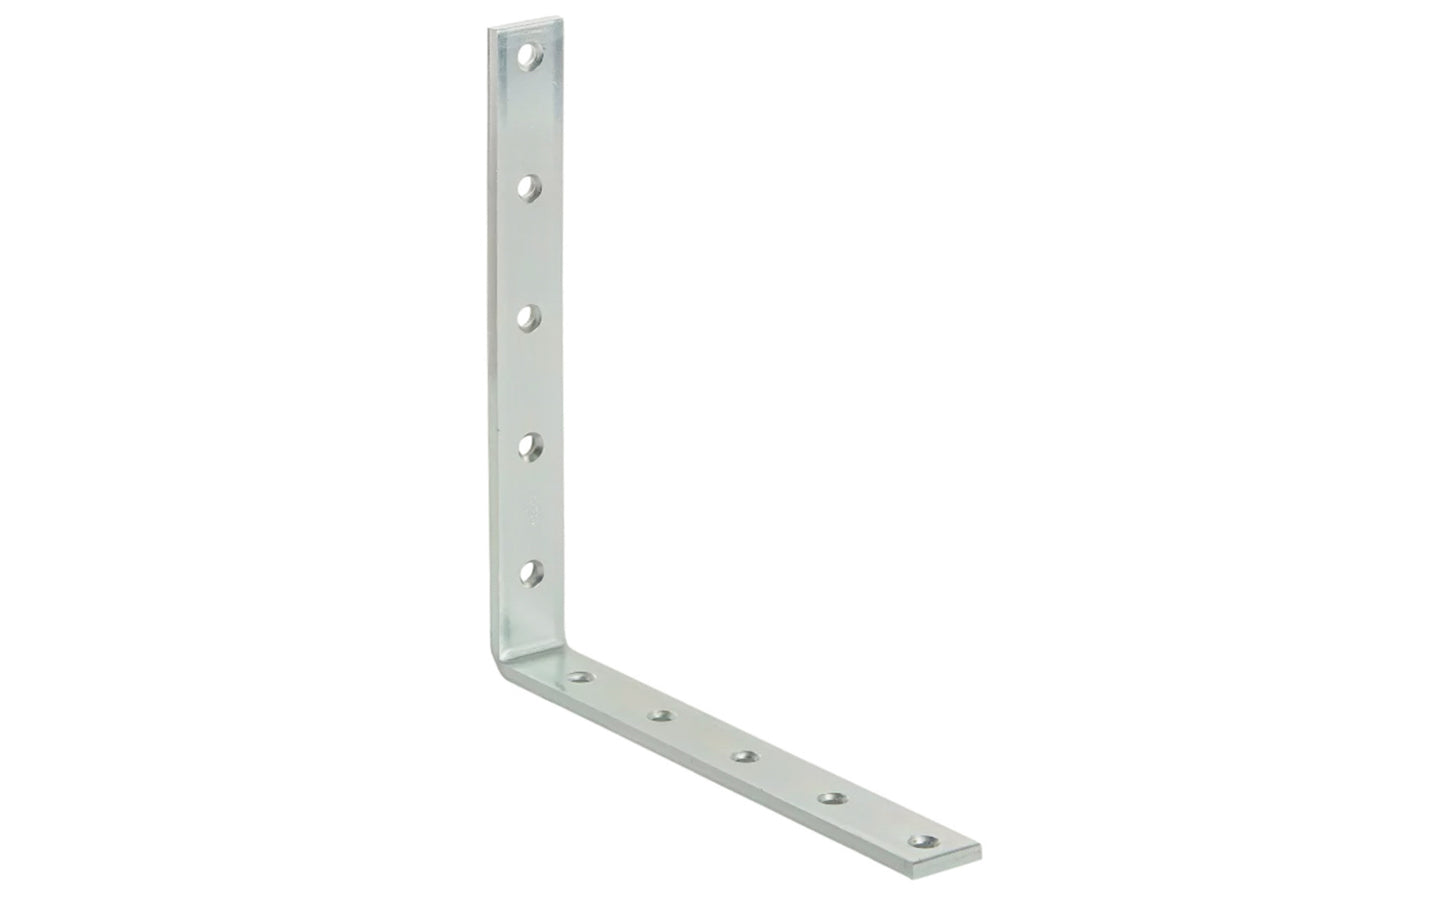 These corner braces are designed for furniture, cabinets, shelving support. Allows for quick & easy repair of items in the workshop, home, etc. Made of steel material with a zinc plated finish. Manufactured from hot-rolled steel. Countersunk holes. 10" long size x 1-1/4" width. National Hardware - Model N220-186.